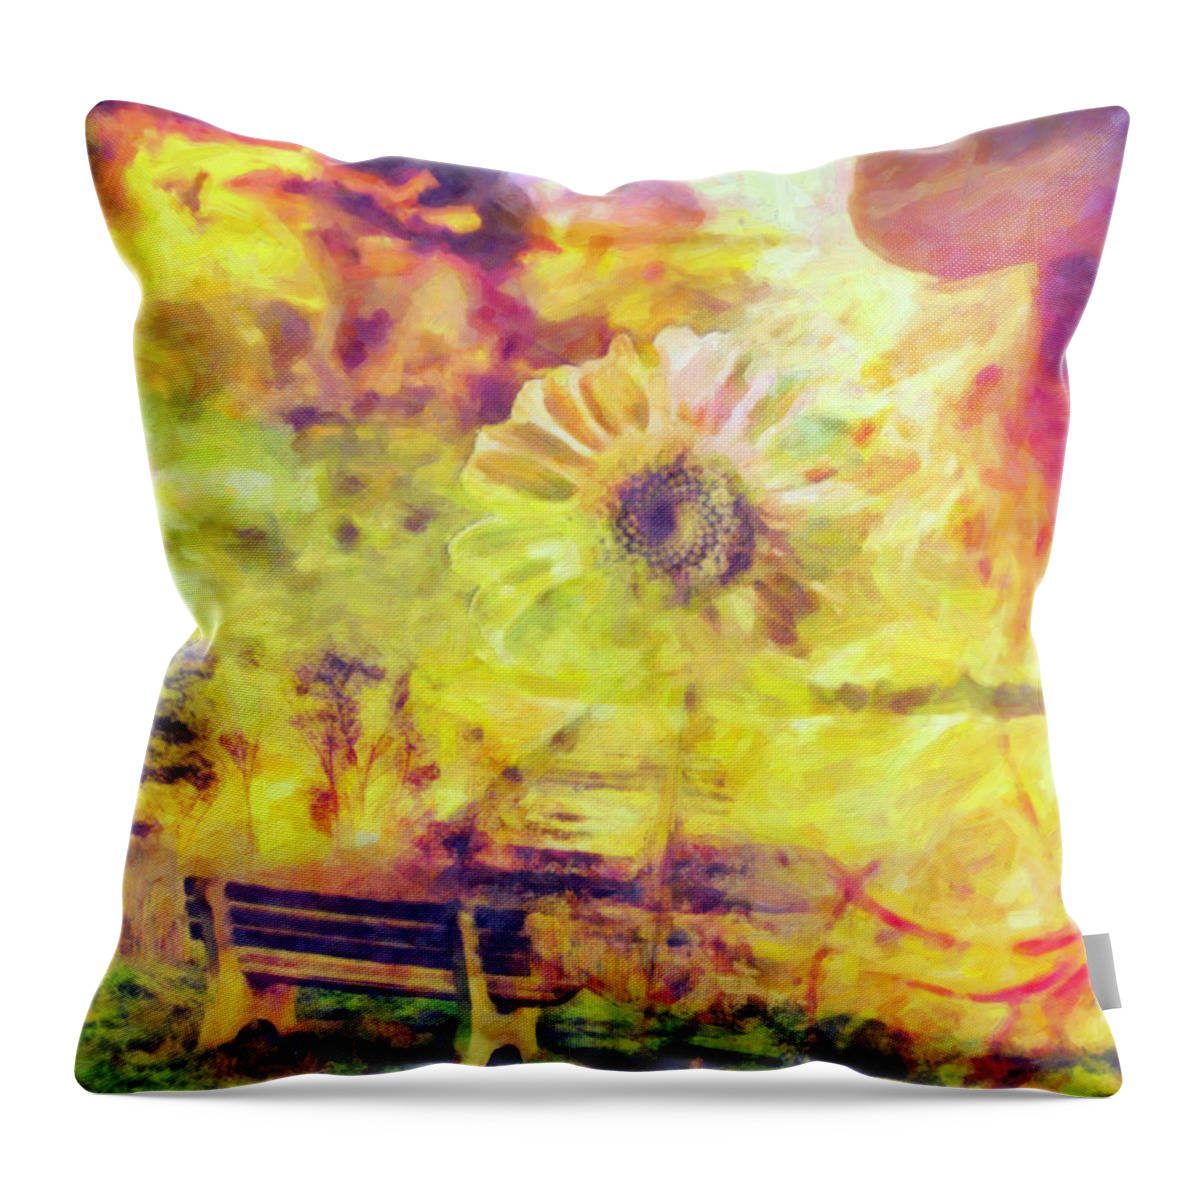 Www.themidnightstreets.net Throw Pillow featuring the painting A Long Journey's End by Joe Misrasi